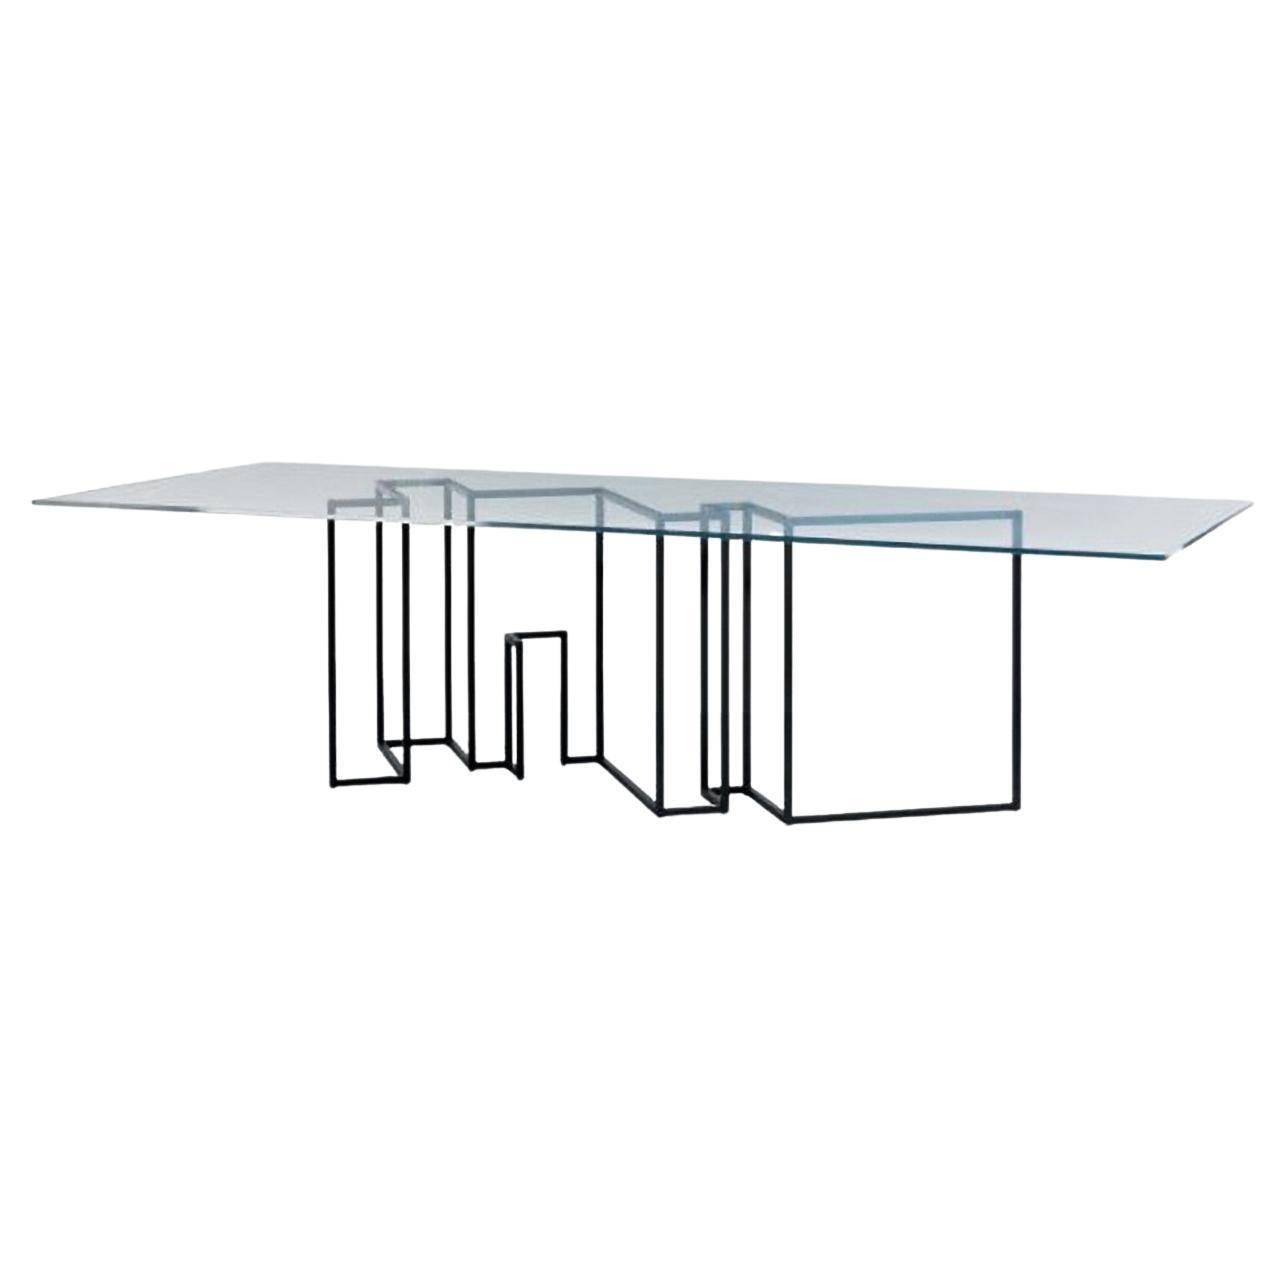 Rectangular dining table designed by Ron Gilad for Dilmos Edizioni.
The table has a lacquered iron base and 22 mm thick extra light glass top with round corners. The design of the base represents the floor plan of the designer's New York apartment.